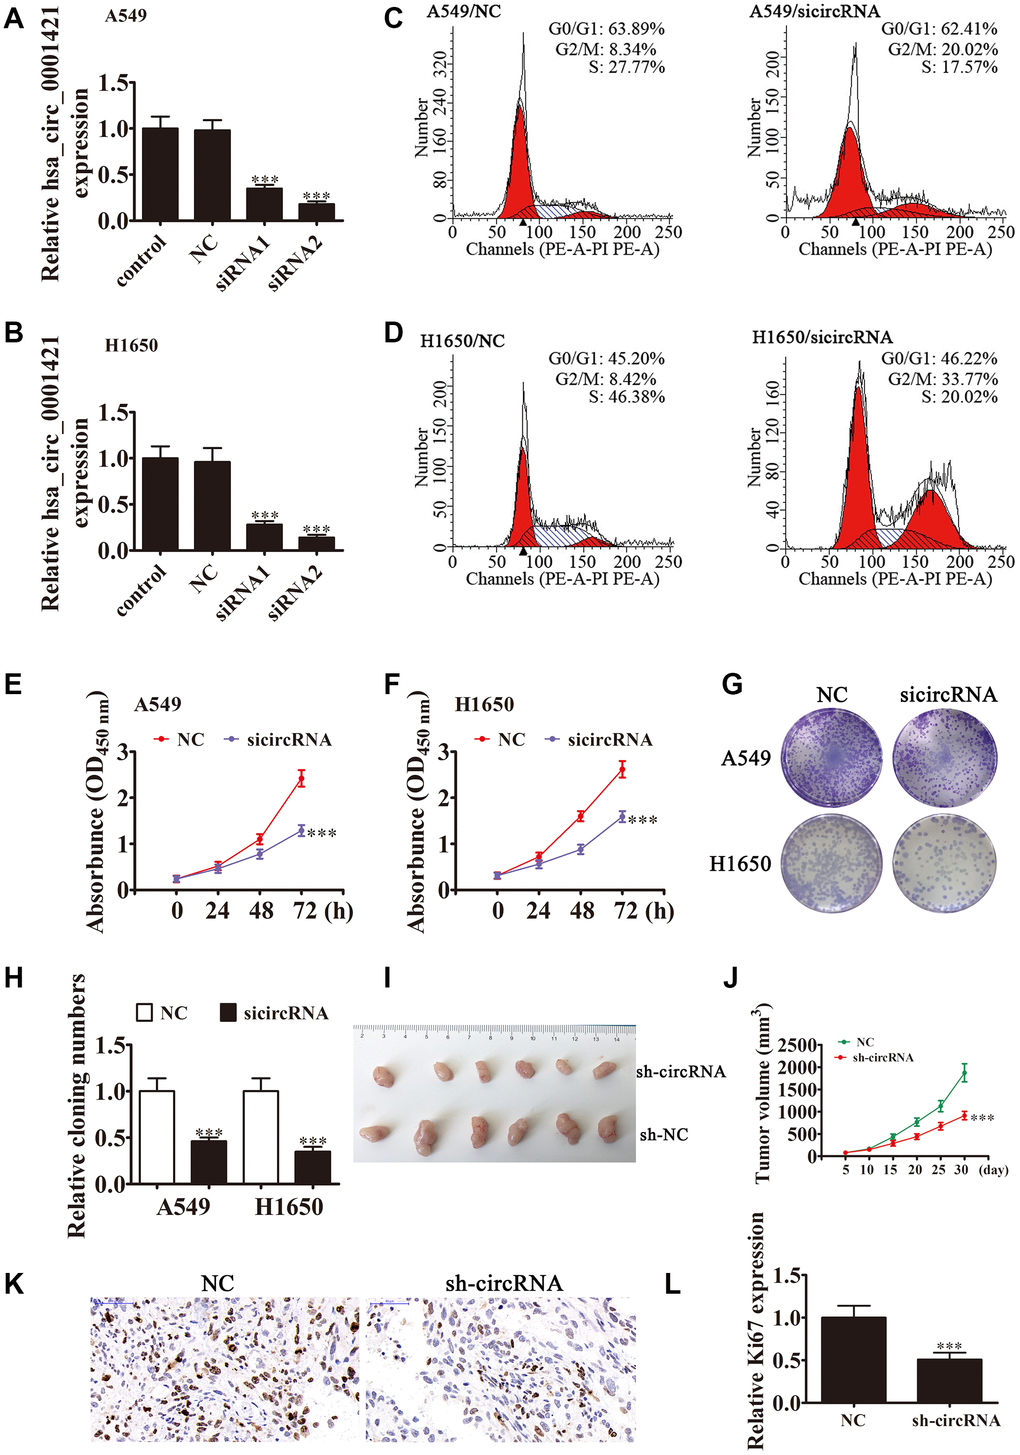 Downregulation of circ-SEC31A suppressed NSCLC proliferation both in vitro and in vivo. (A and B) RT-qPCR detection showing the expression of circ-SEC31A in both A649 (A) and H1650 (B) cells after transfection with siRNA against circ-SEC31A (si-circRNA) or negative control (NC). Data are presented as mean ± SD; ***PC and D) Flow cytometry detection showing the percentages of cells in G1, S, or G2 phase in both A549 (C) and H1650 (D) cells. (E and F) CCK8 assays were used to evaluate cell proliferation. Data are presented as mean ± SD; ***PG and H) Colony formation assay showing proliferation in both A549 and H1650 cells. Data are presented as mean ± SD; ***PI and J) Xenograft tumor studies. A549 cells transfected with NC or sh-circRNA were subcutaneously injected into nude mice, and tumor growth curves were plotted. Data are presented as mean ± SD; **PK) Immunohistochemistry showing the percentage of Ki-67-positive cells. (L) The relative levels Ki-67-positive cells were calculated. Data are presented as mean ± SD; ***P